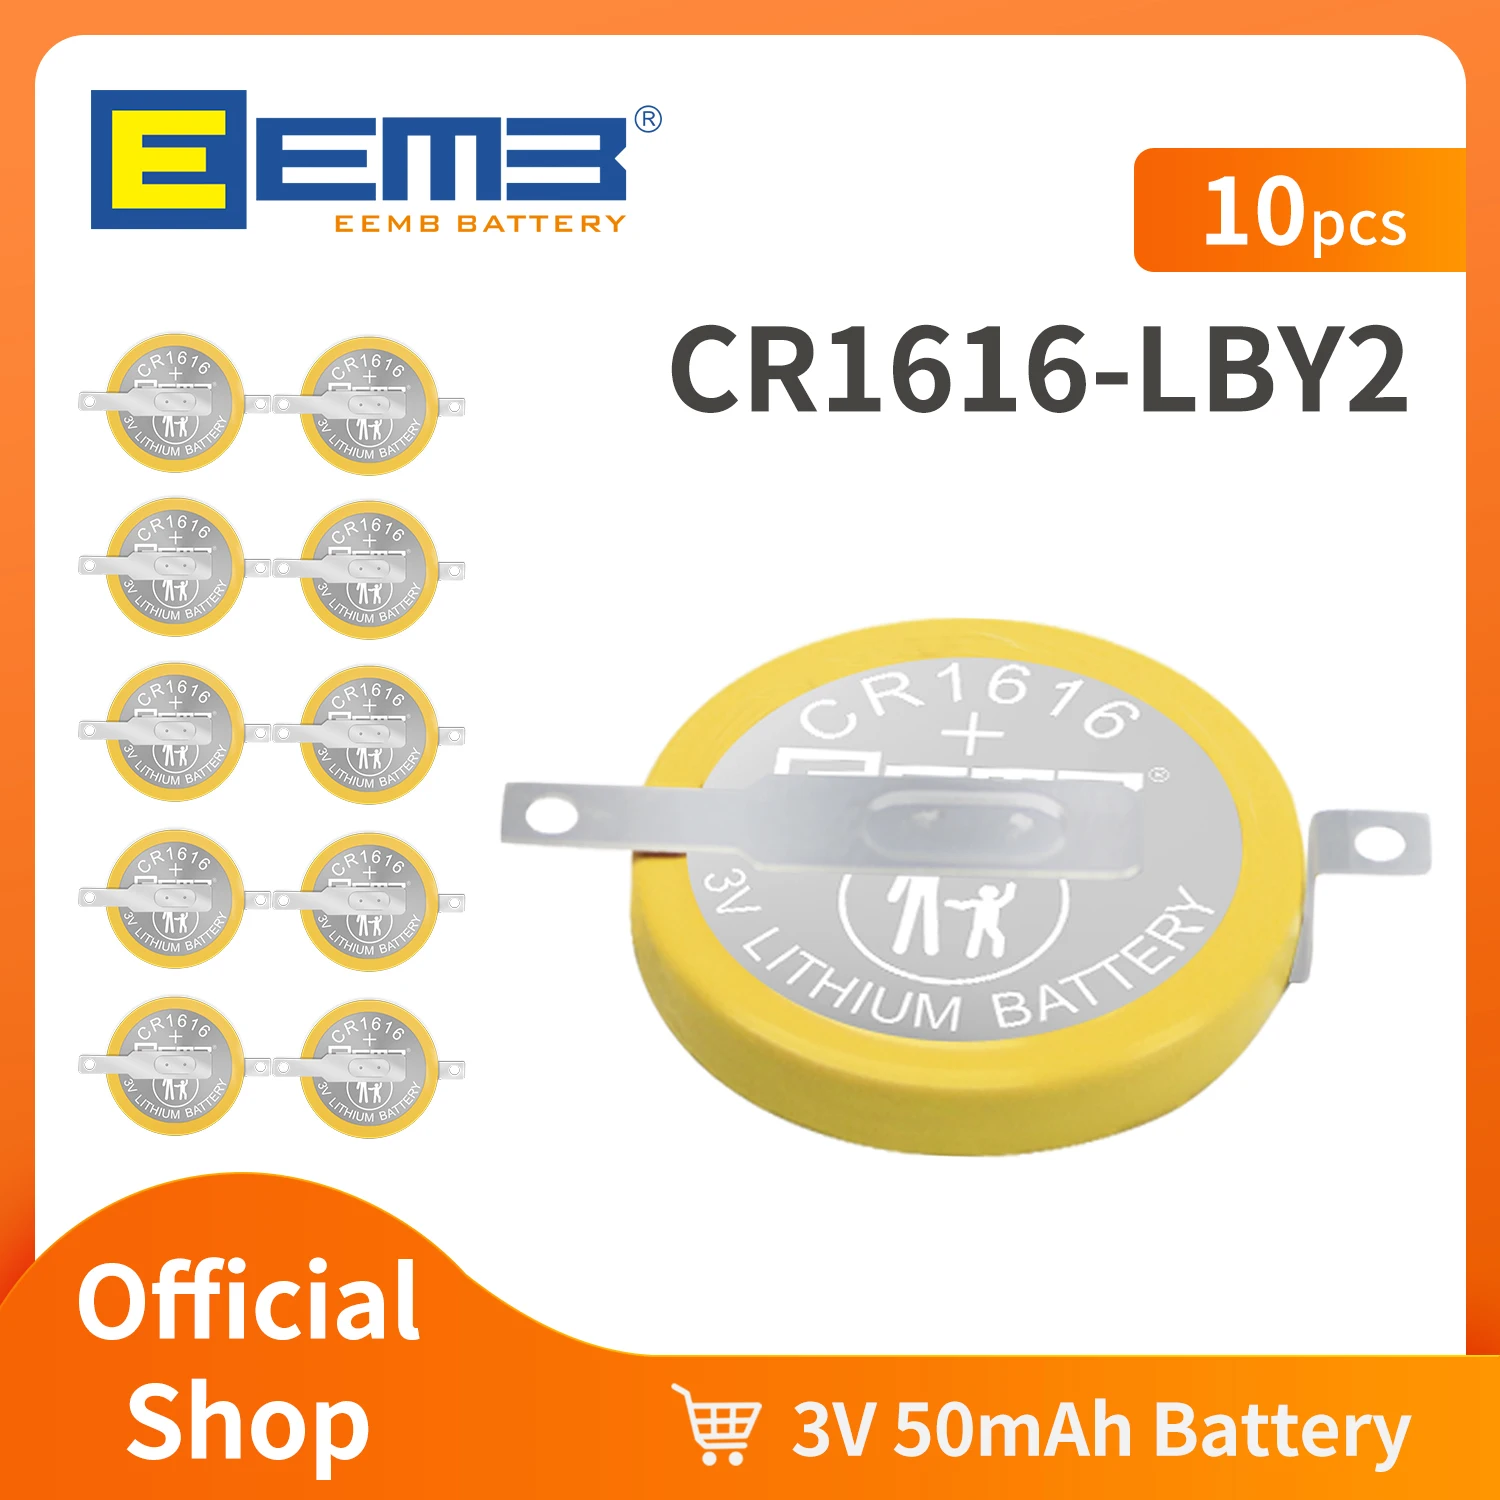 EEMB CR1616 Battery With LBY2 Solder Tabs CR1616 Tabbed Battery Compatible with Gameboy Color Gameboy Advance game box（10PCS)